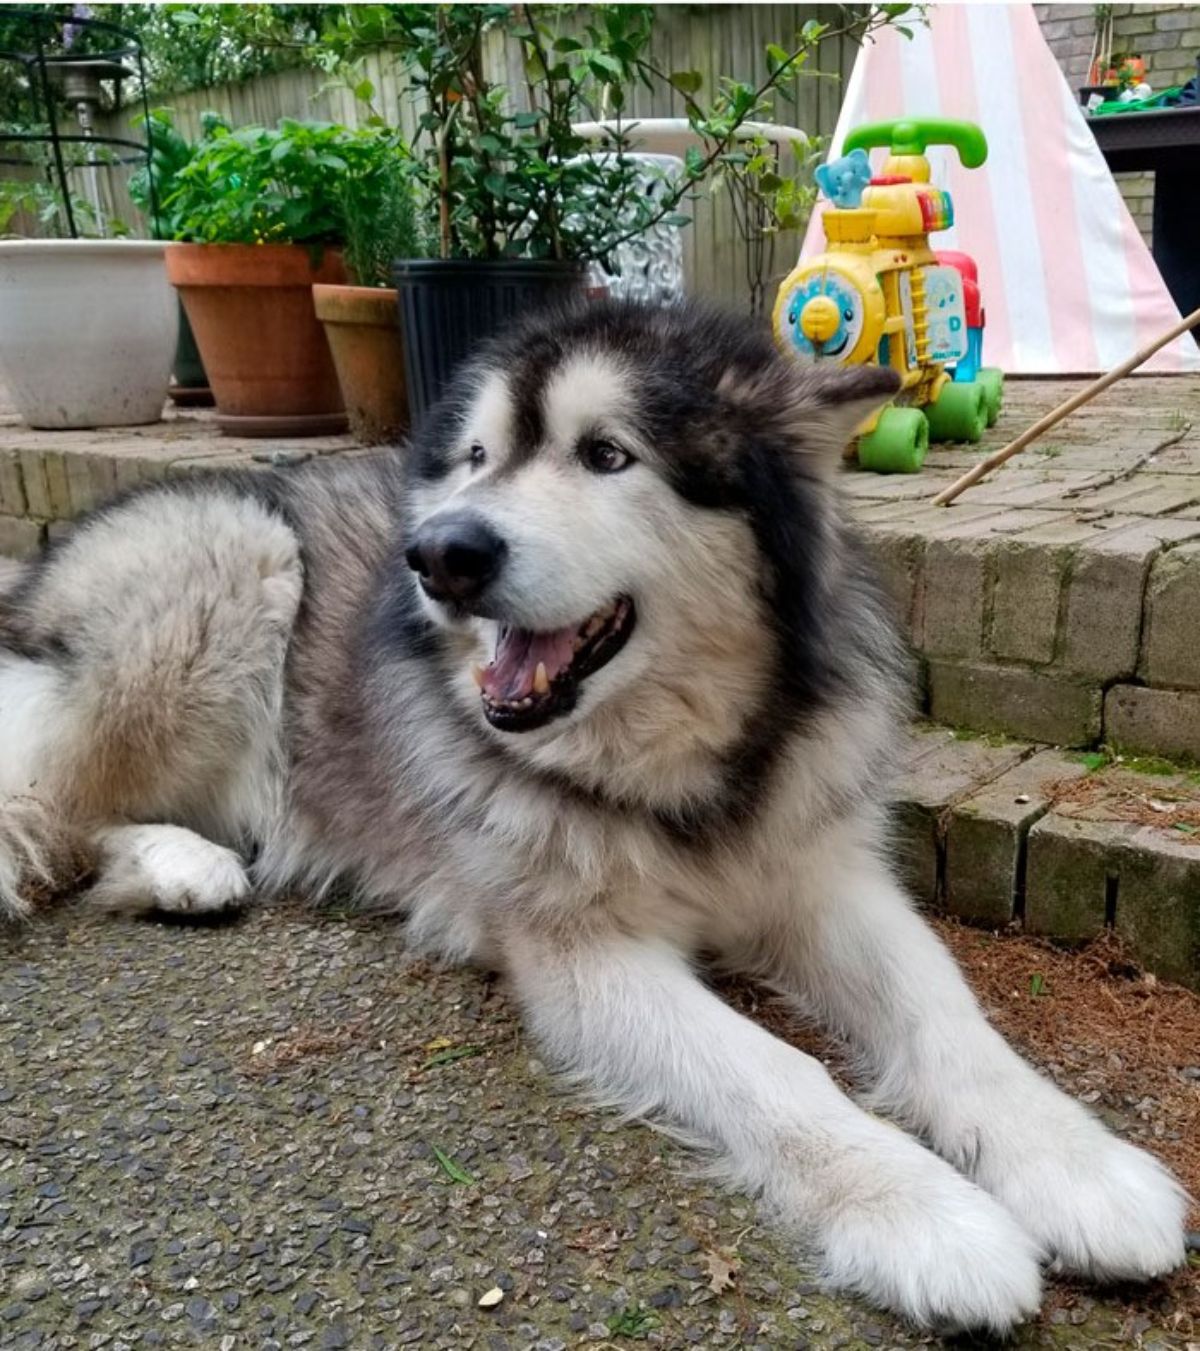 alaskan malamute laying on the floor in a garden by a stair